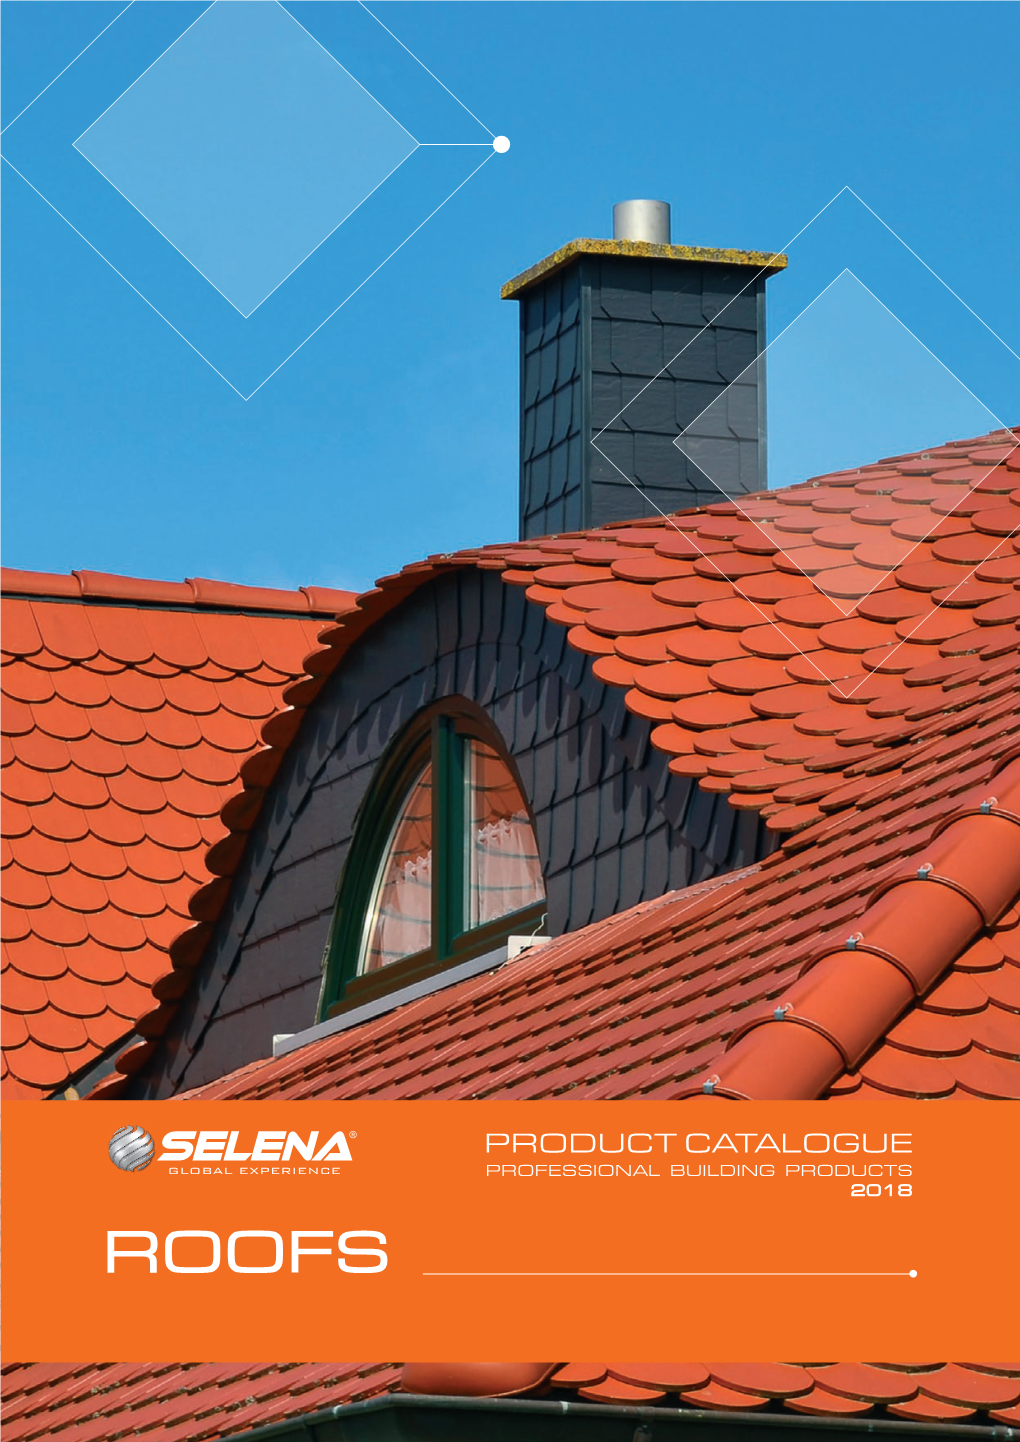 Product Catalogue Professional Building Products 2018 Roofs Rroofsoofs